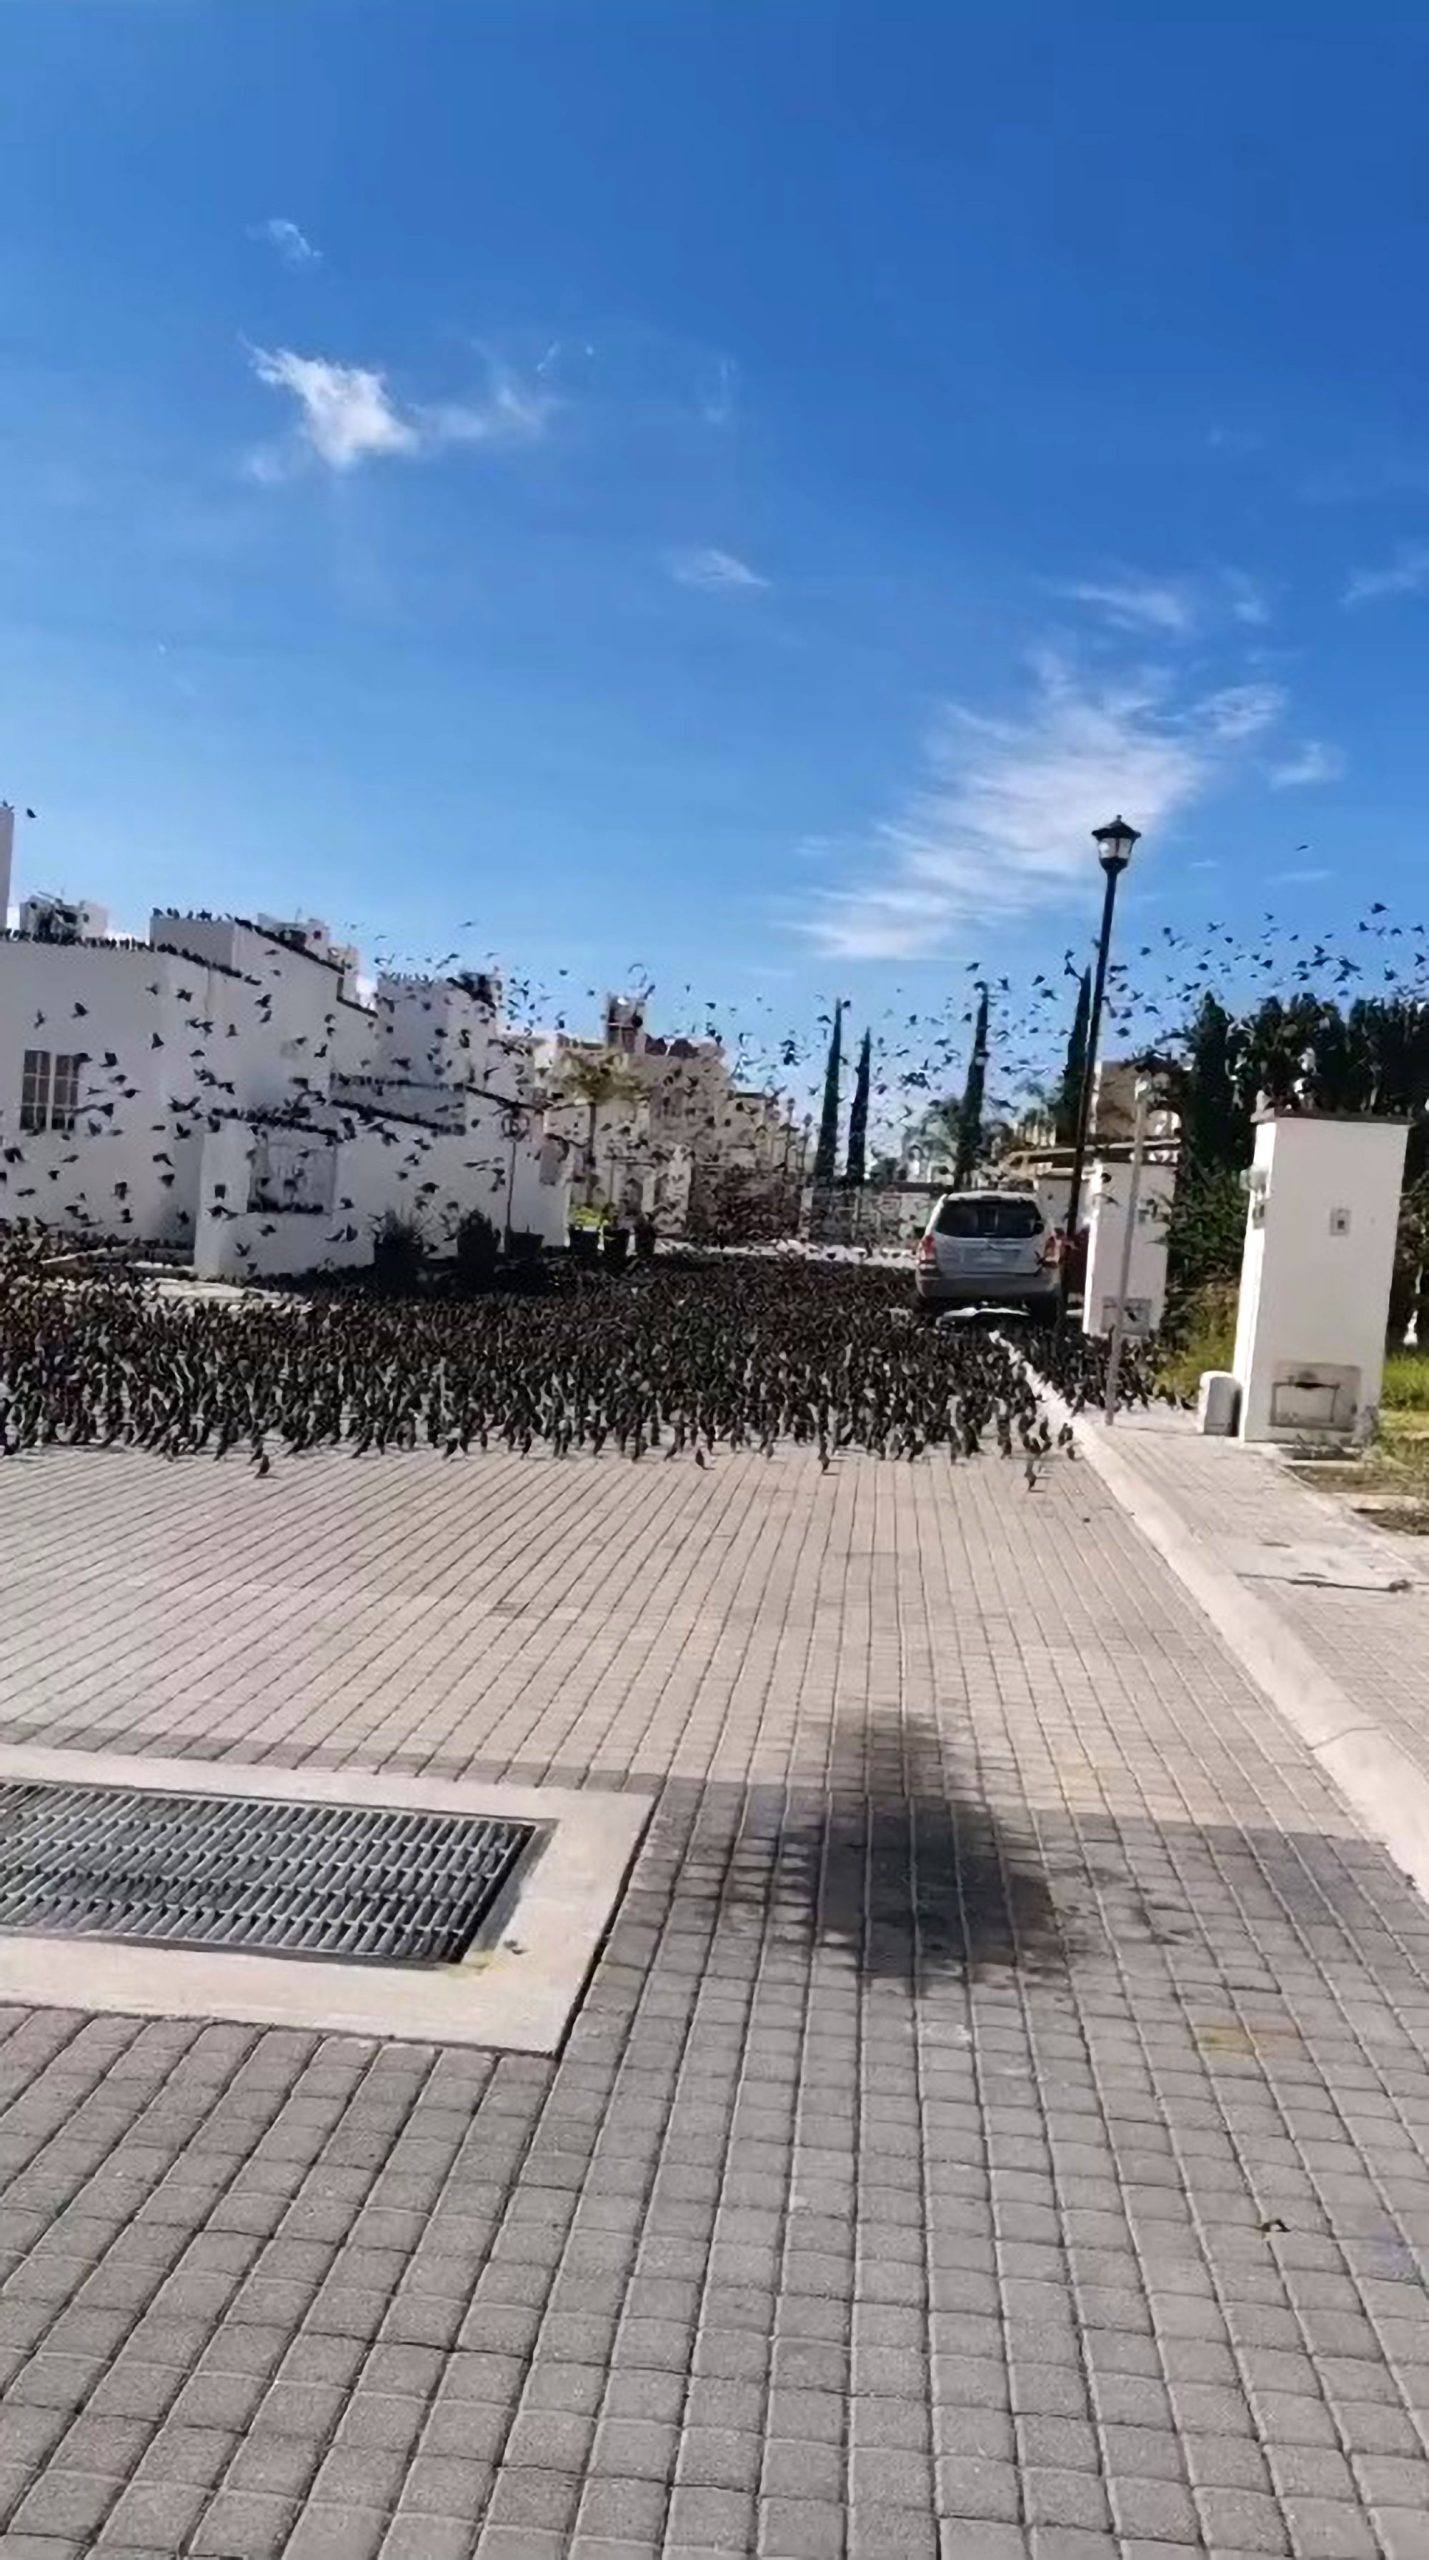 Read more about the article Viral: Mexican Man Stunned By Thousands Of Birds Outside His Home